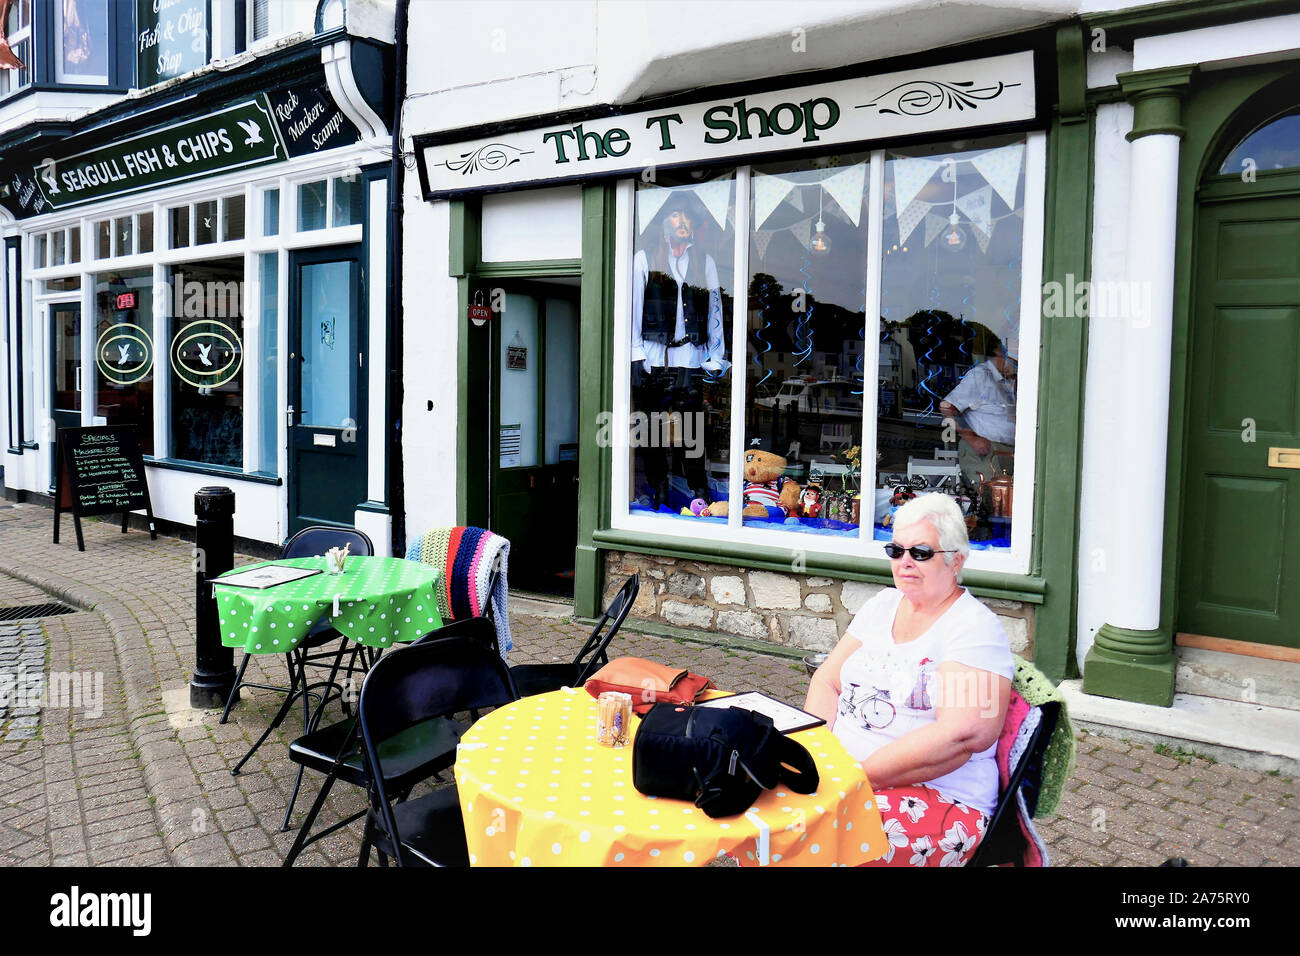 Weymouth, Dorset, UK. May 18, 2018. A senior lady sitting alfresco outside the T shop on the habour at Weymouth in Dorset, UK. Stock Photo